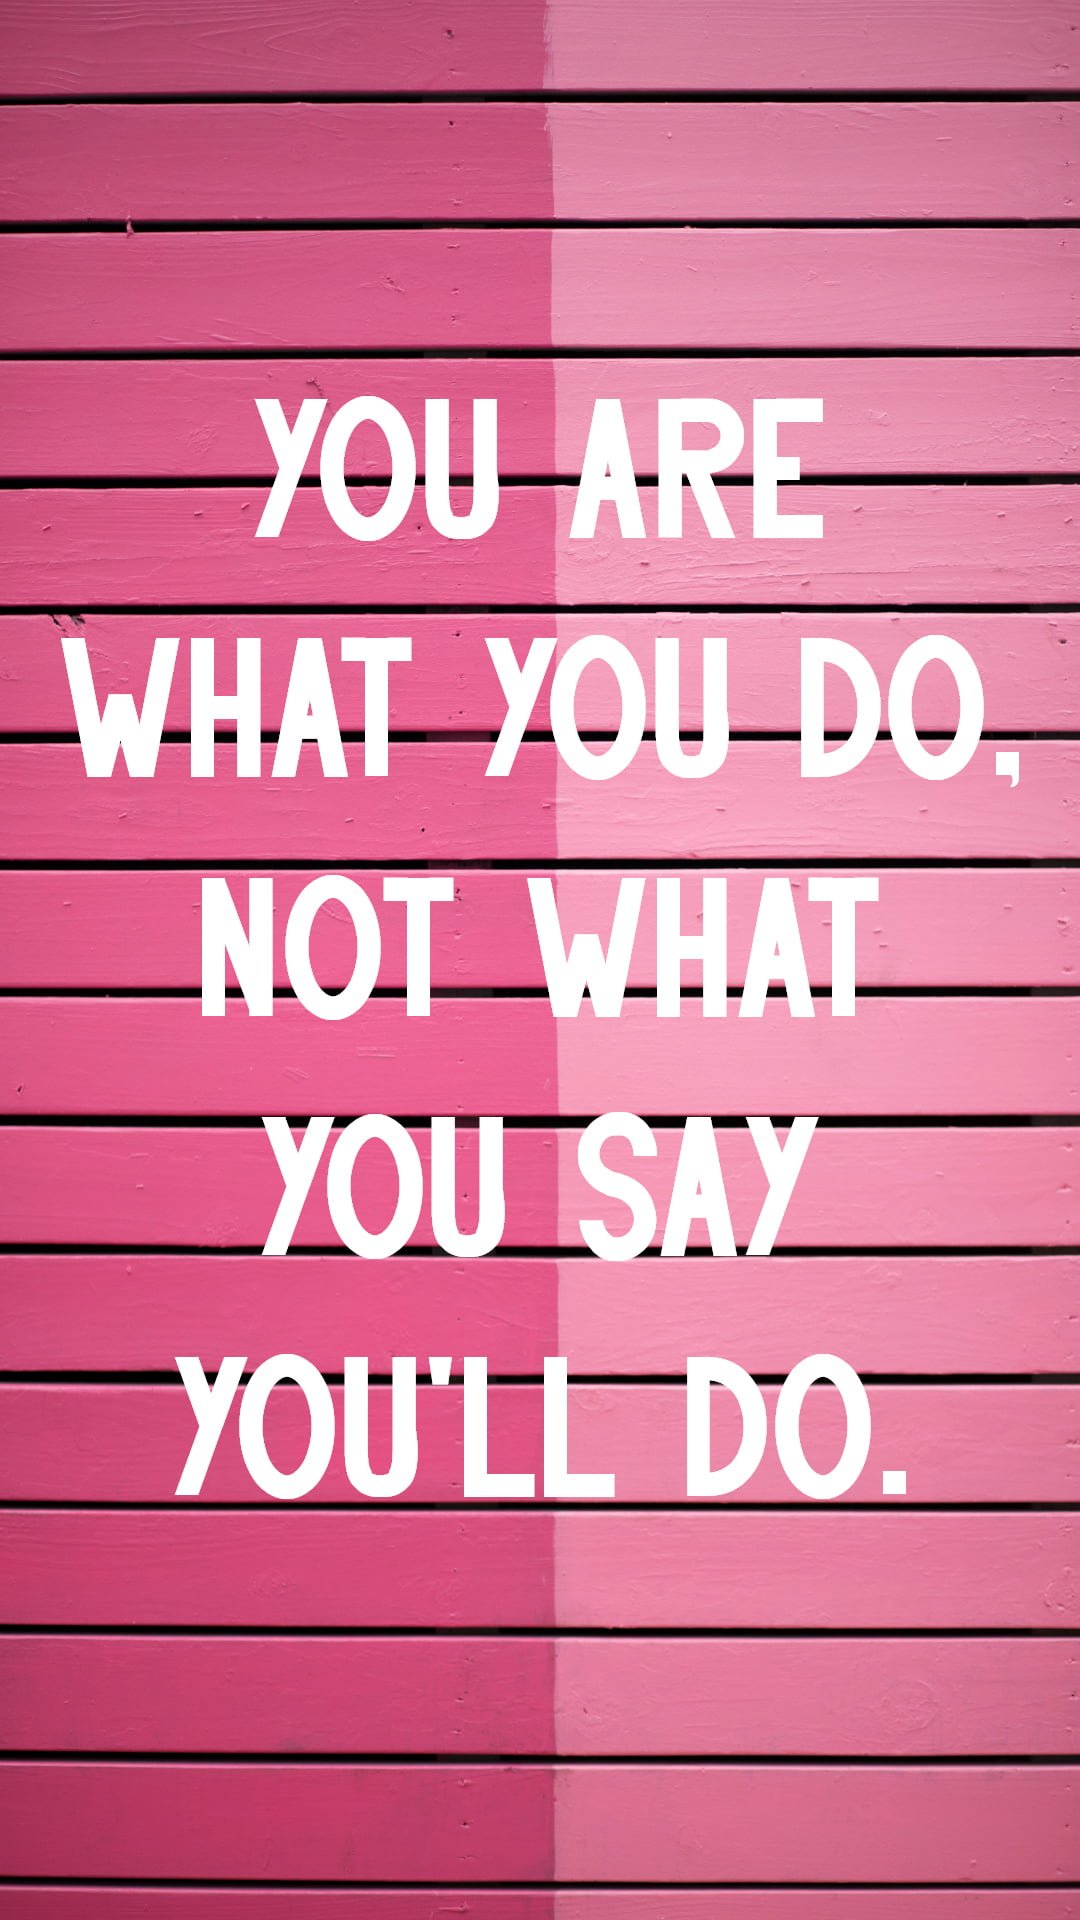 You are what you do